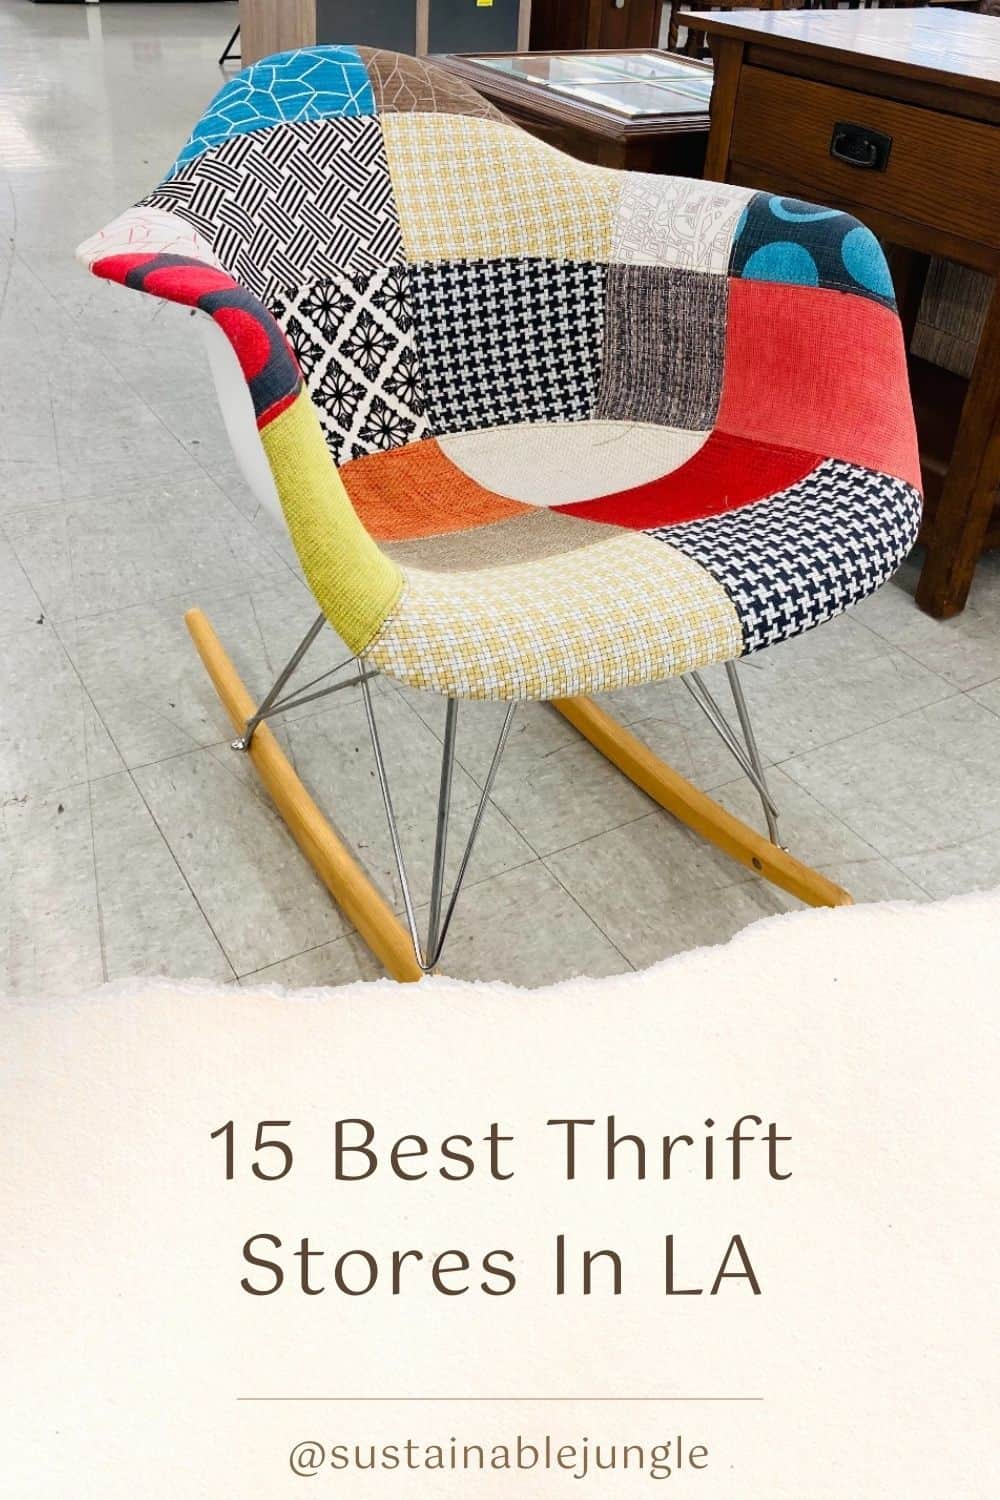 15 Best Thrift Stores In LA For Star-Studded Secondhand & VIP Vintage Image by Beacon House Thrift #thriftstoresinLA #thriftstoresLA #thriftstoresinLosAngeles #losAngelesthriftstores #LAthriftshops #bestthriftinginLA #sustainablejungle